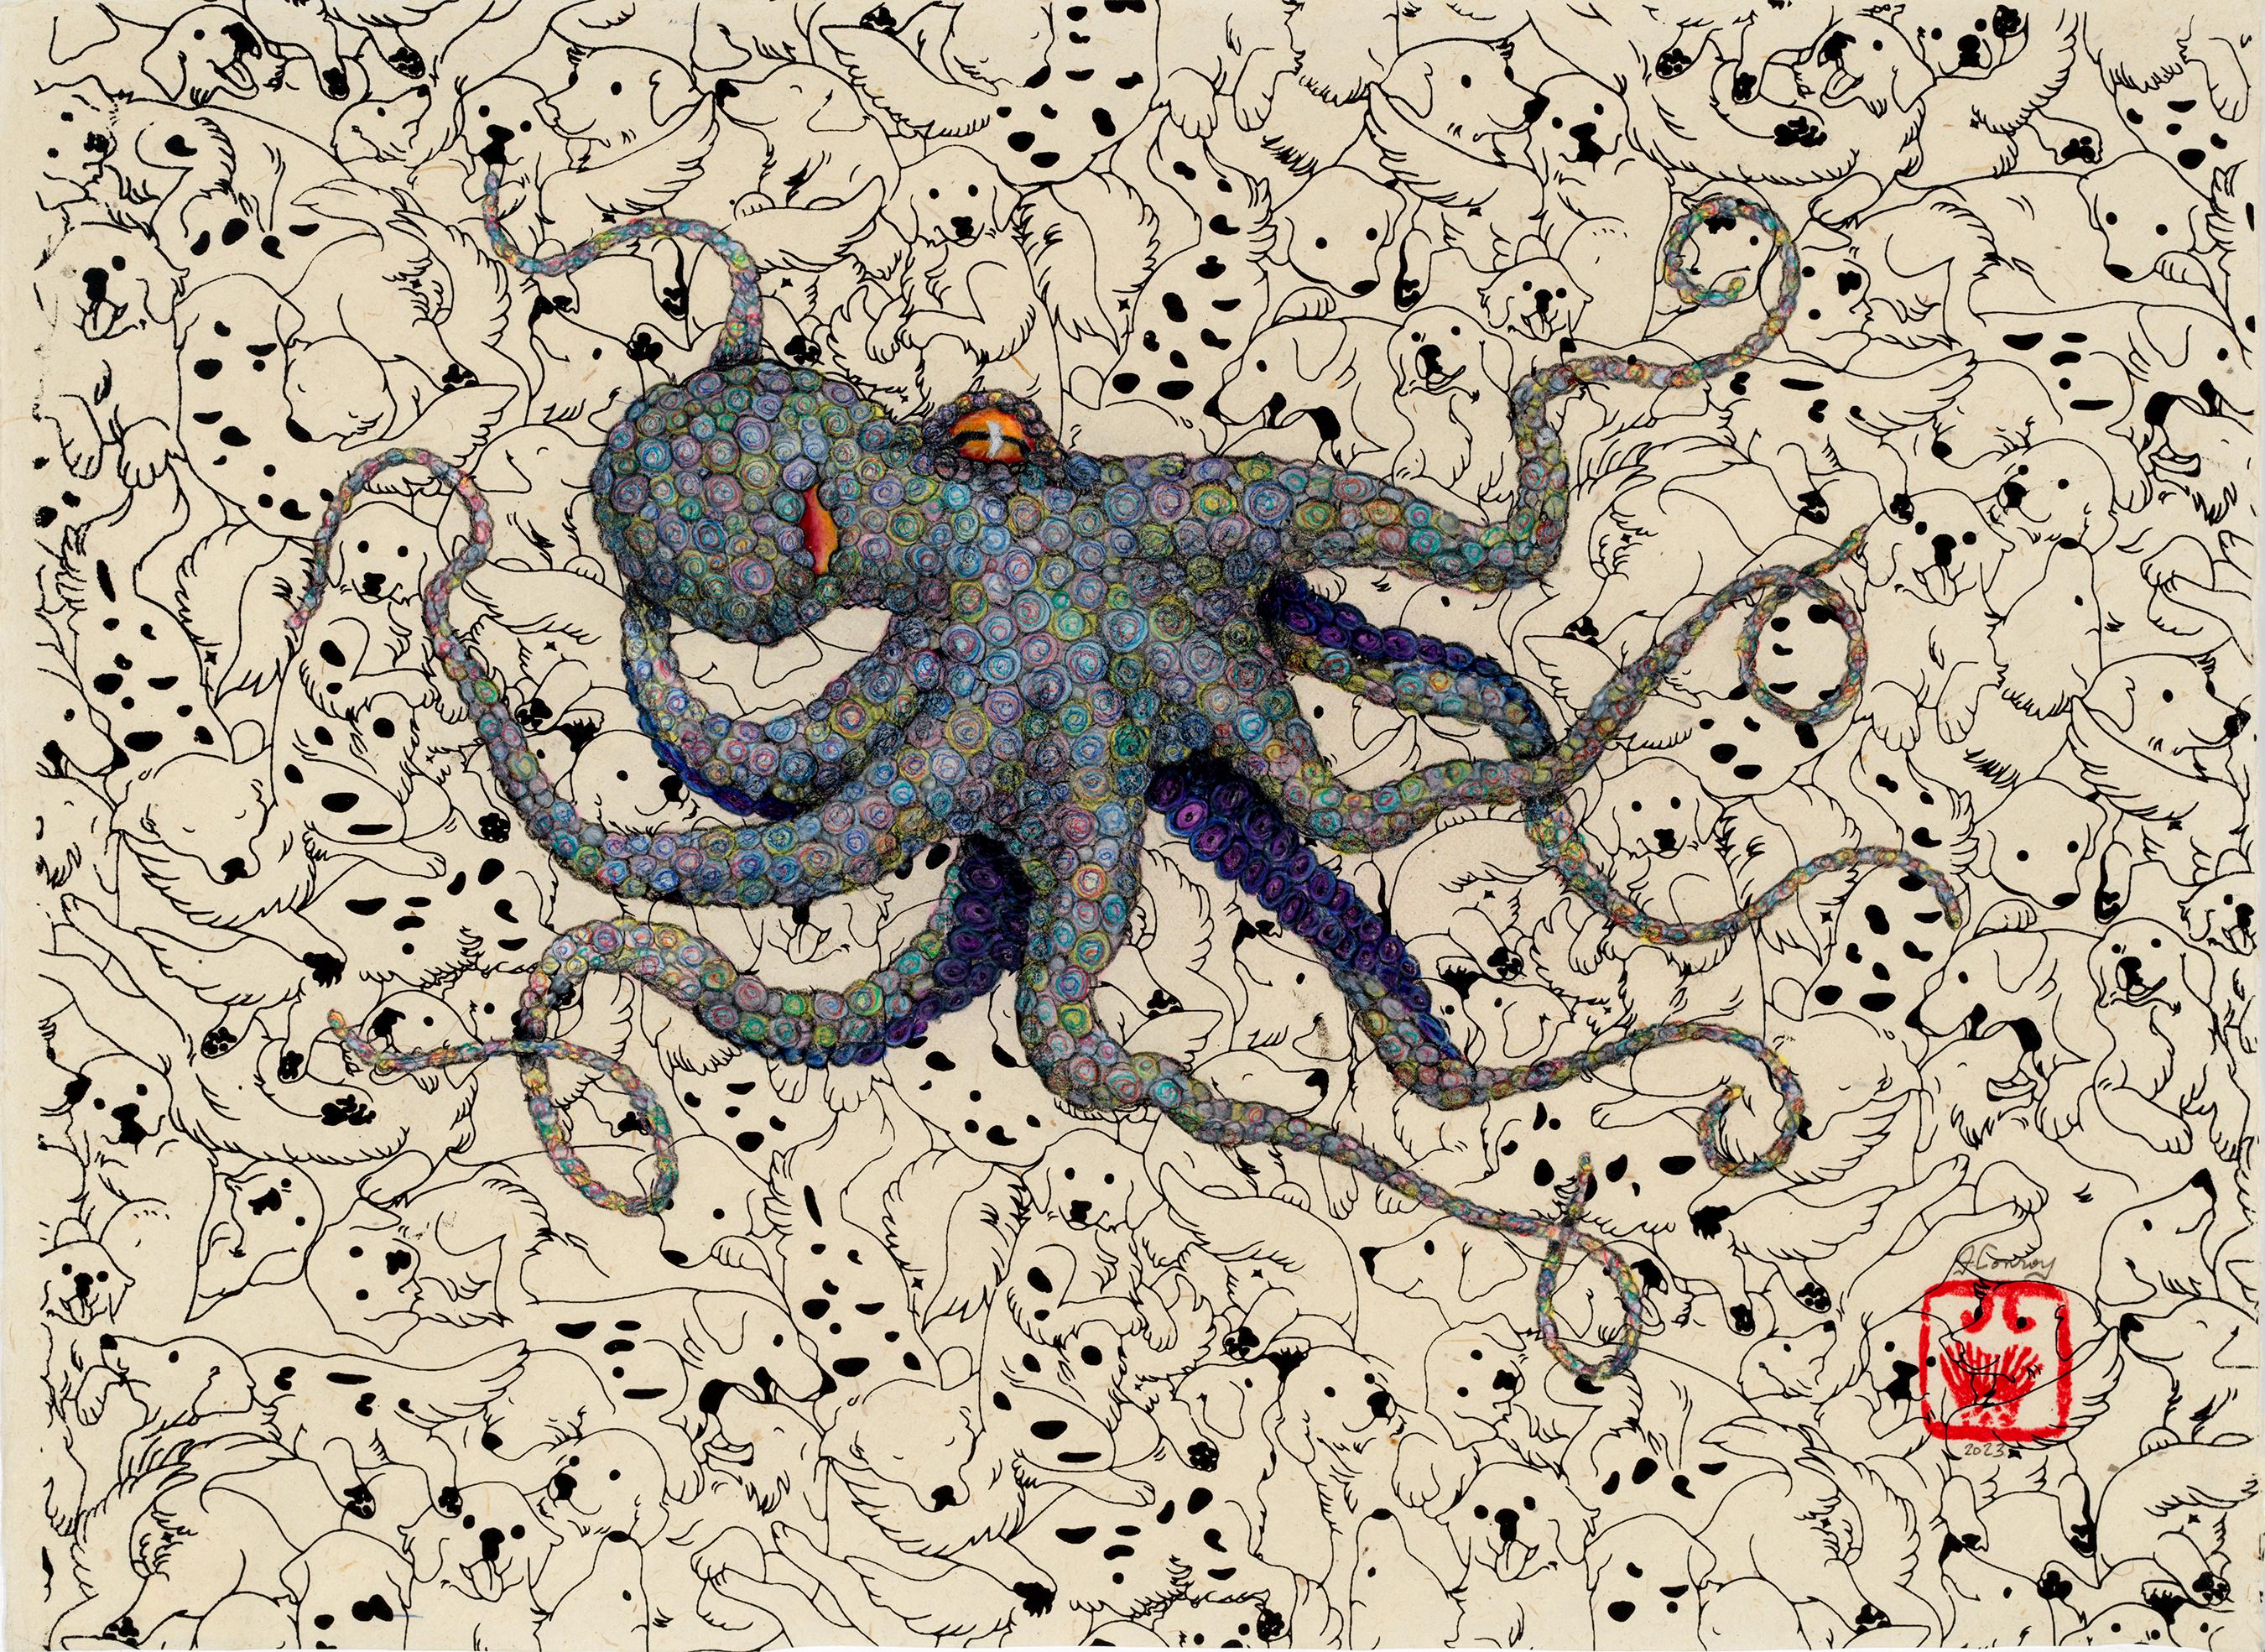 Jeff Conroy Animal Painting - Puppypus - Pastel - Gyotaku Style Sumi Ink Painting of an Octopus